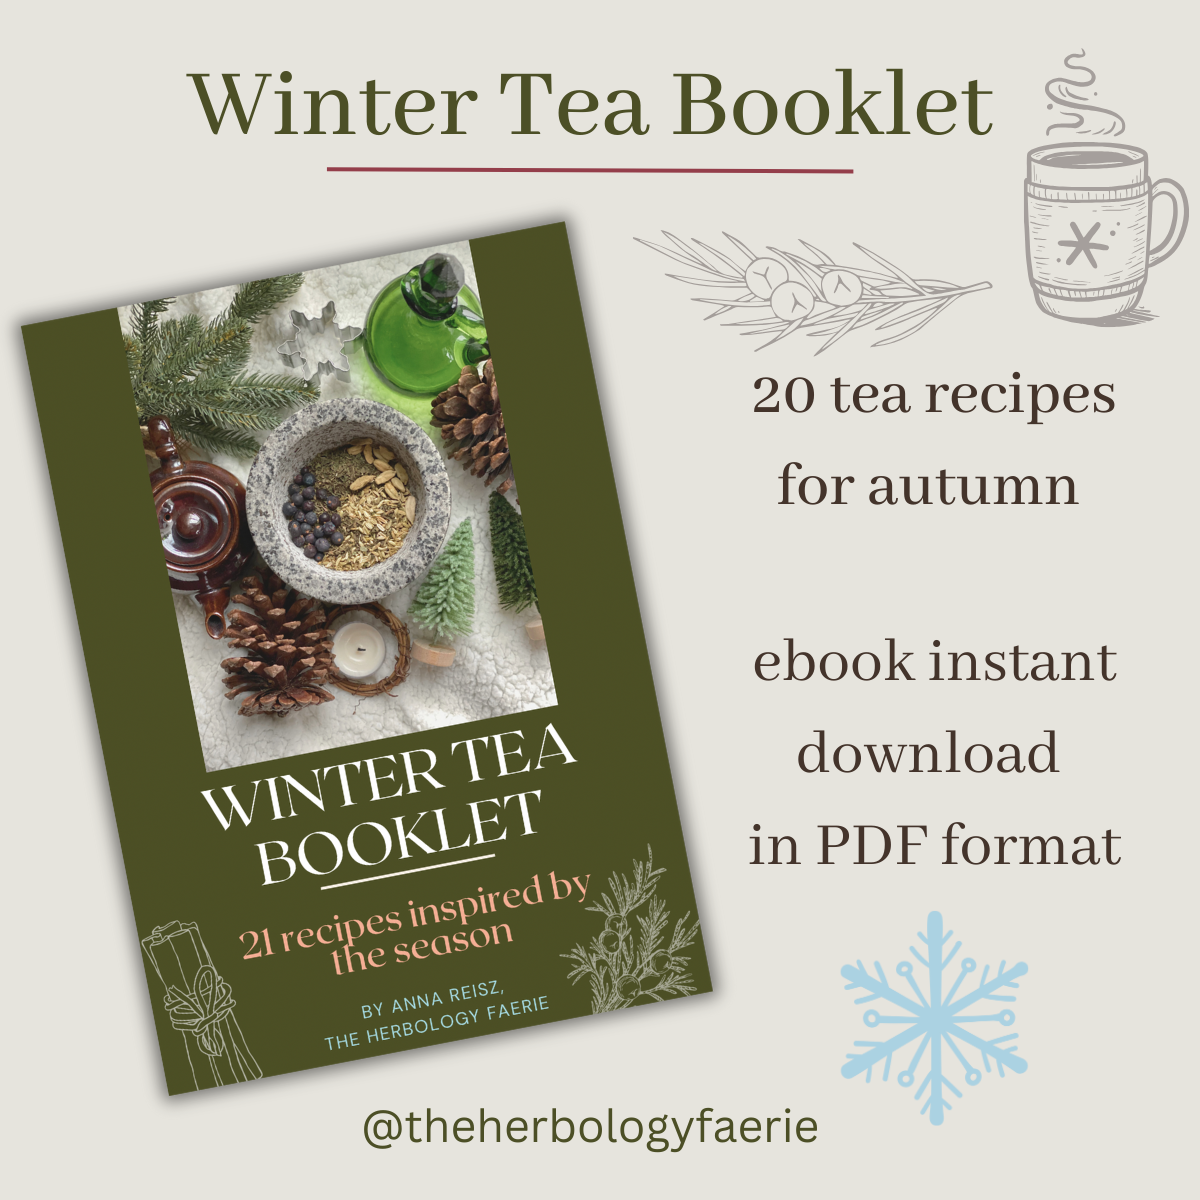 Winter Tea Recipe Booklet by The Herbology Faerie